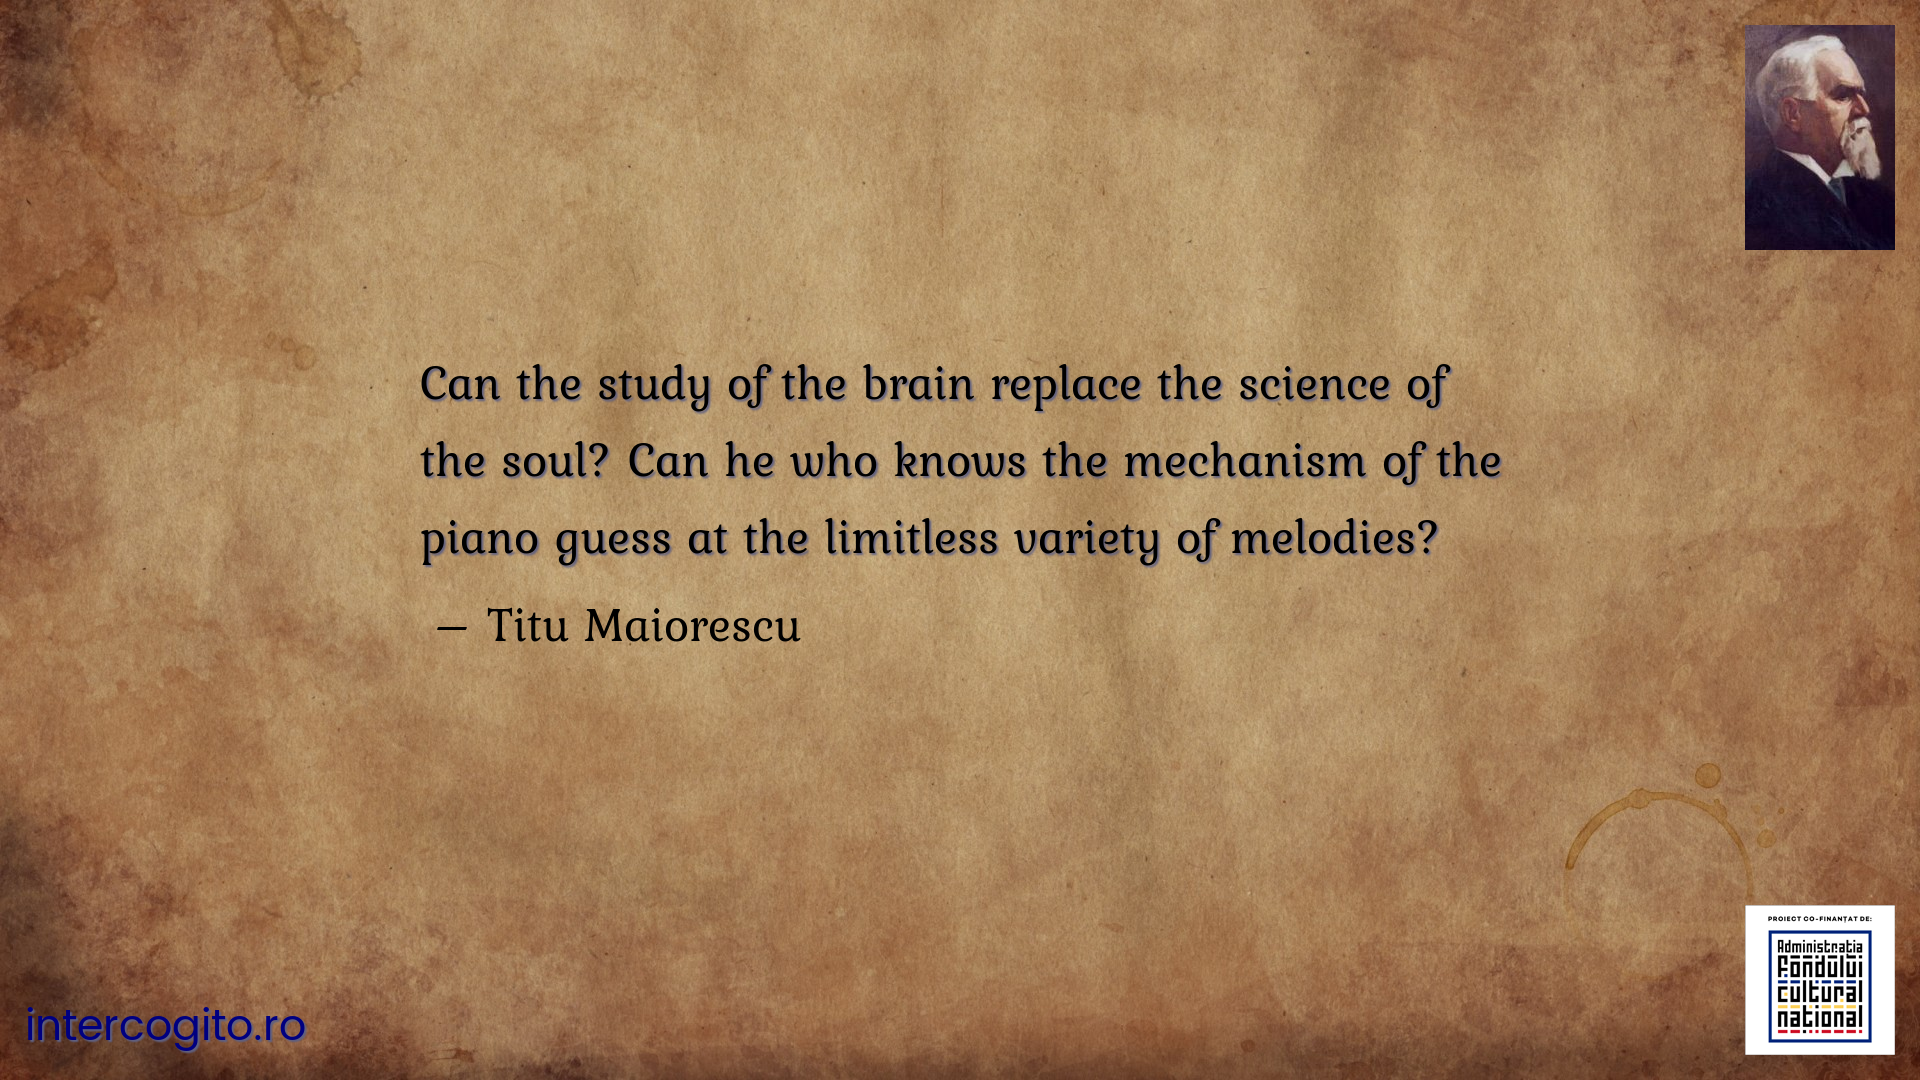 Can the study of the brain replace the science of the soul? Can he who knows the mechanism of the piano guess at the limitless variety of melodies?